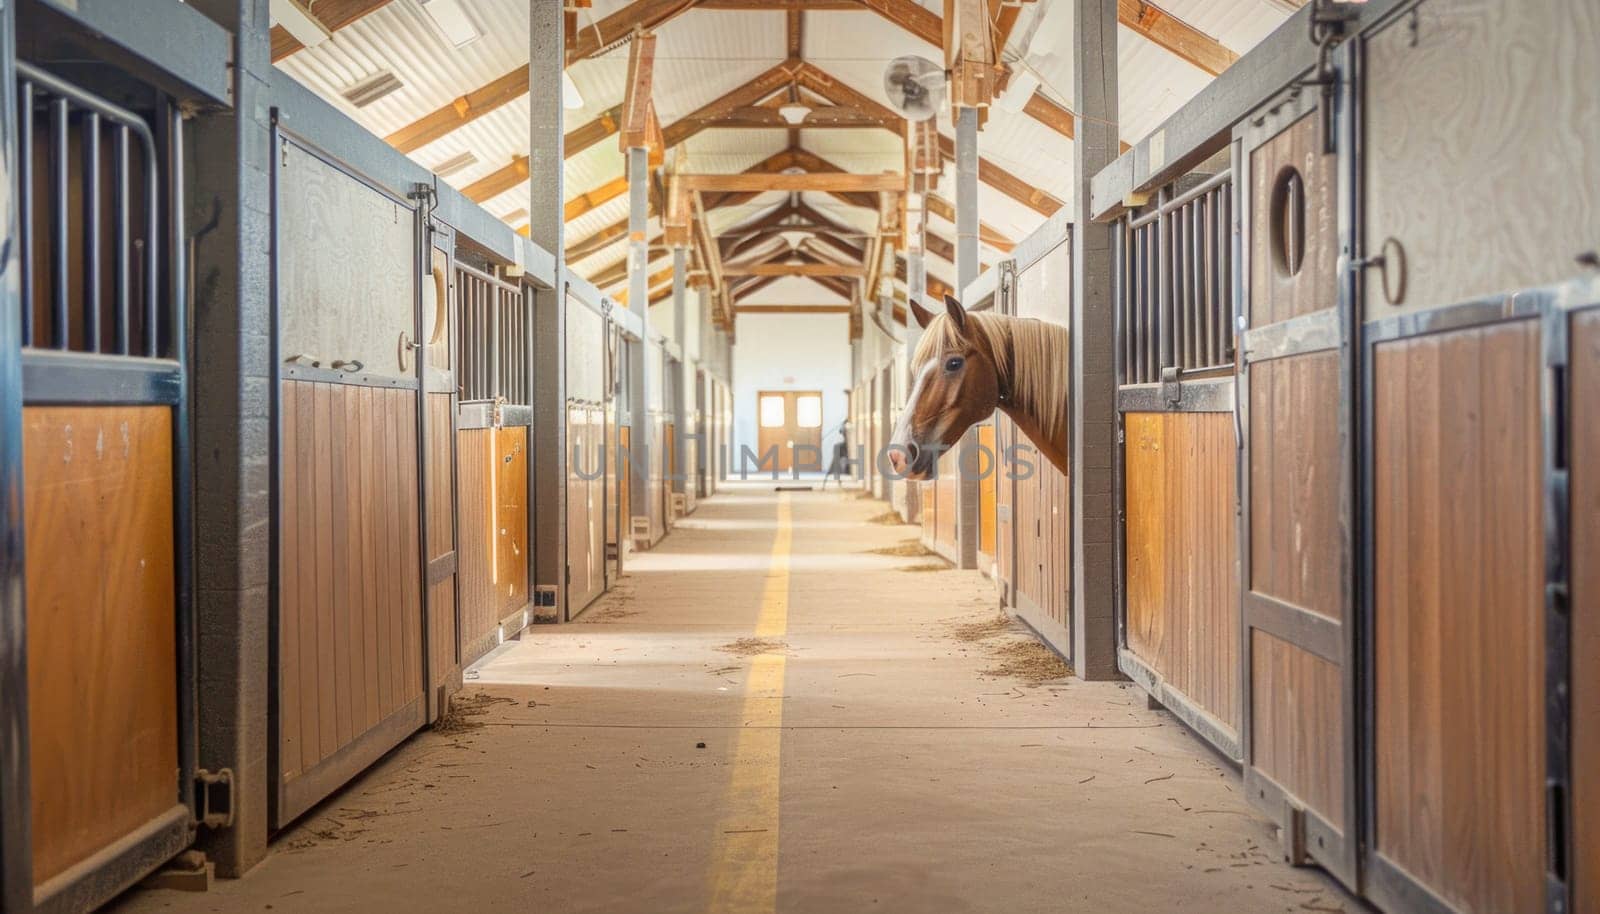 A horse is positioned among a row of wooden stables, creating a symmetrical pattern within the urban setting